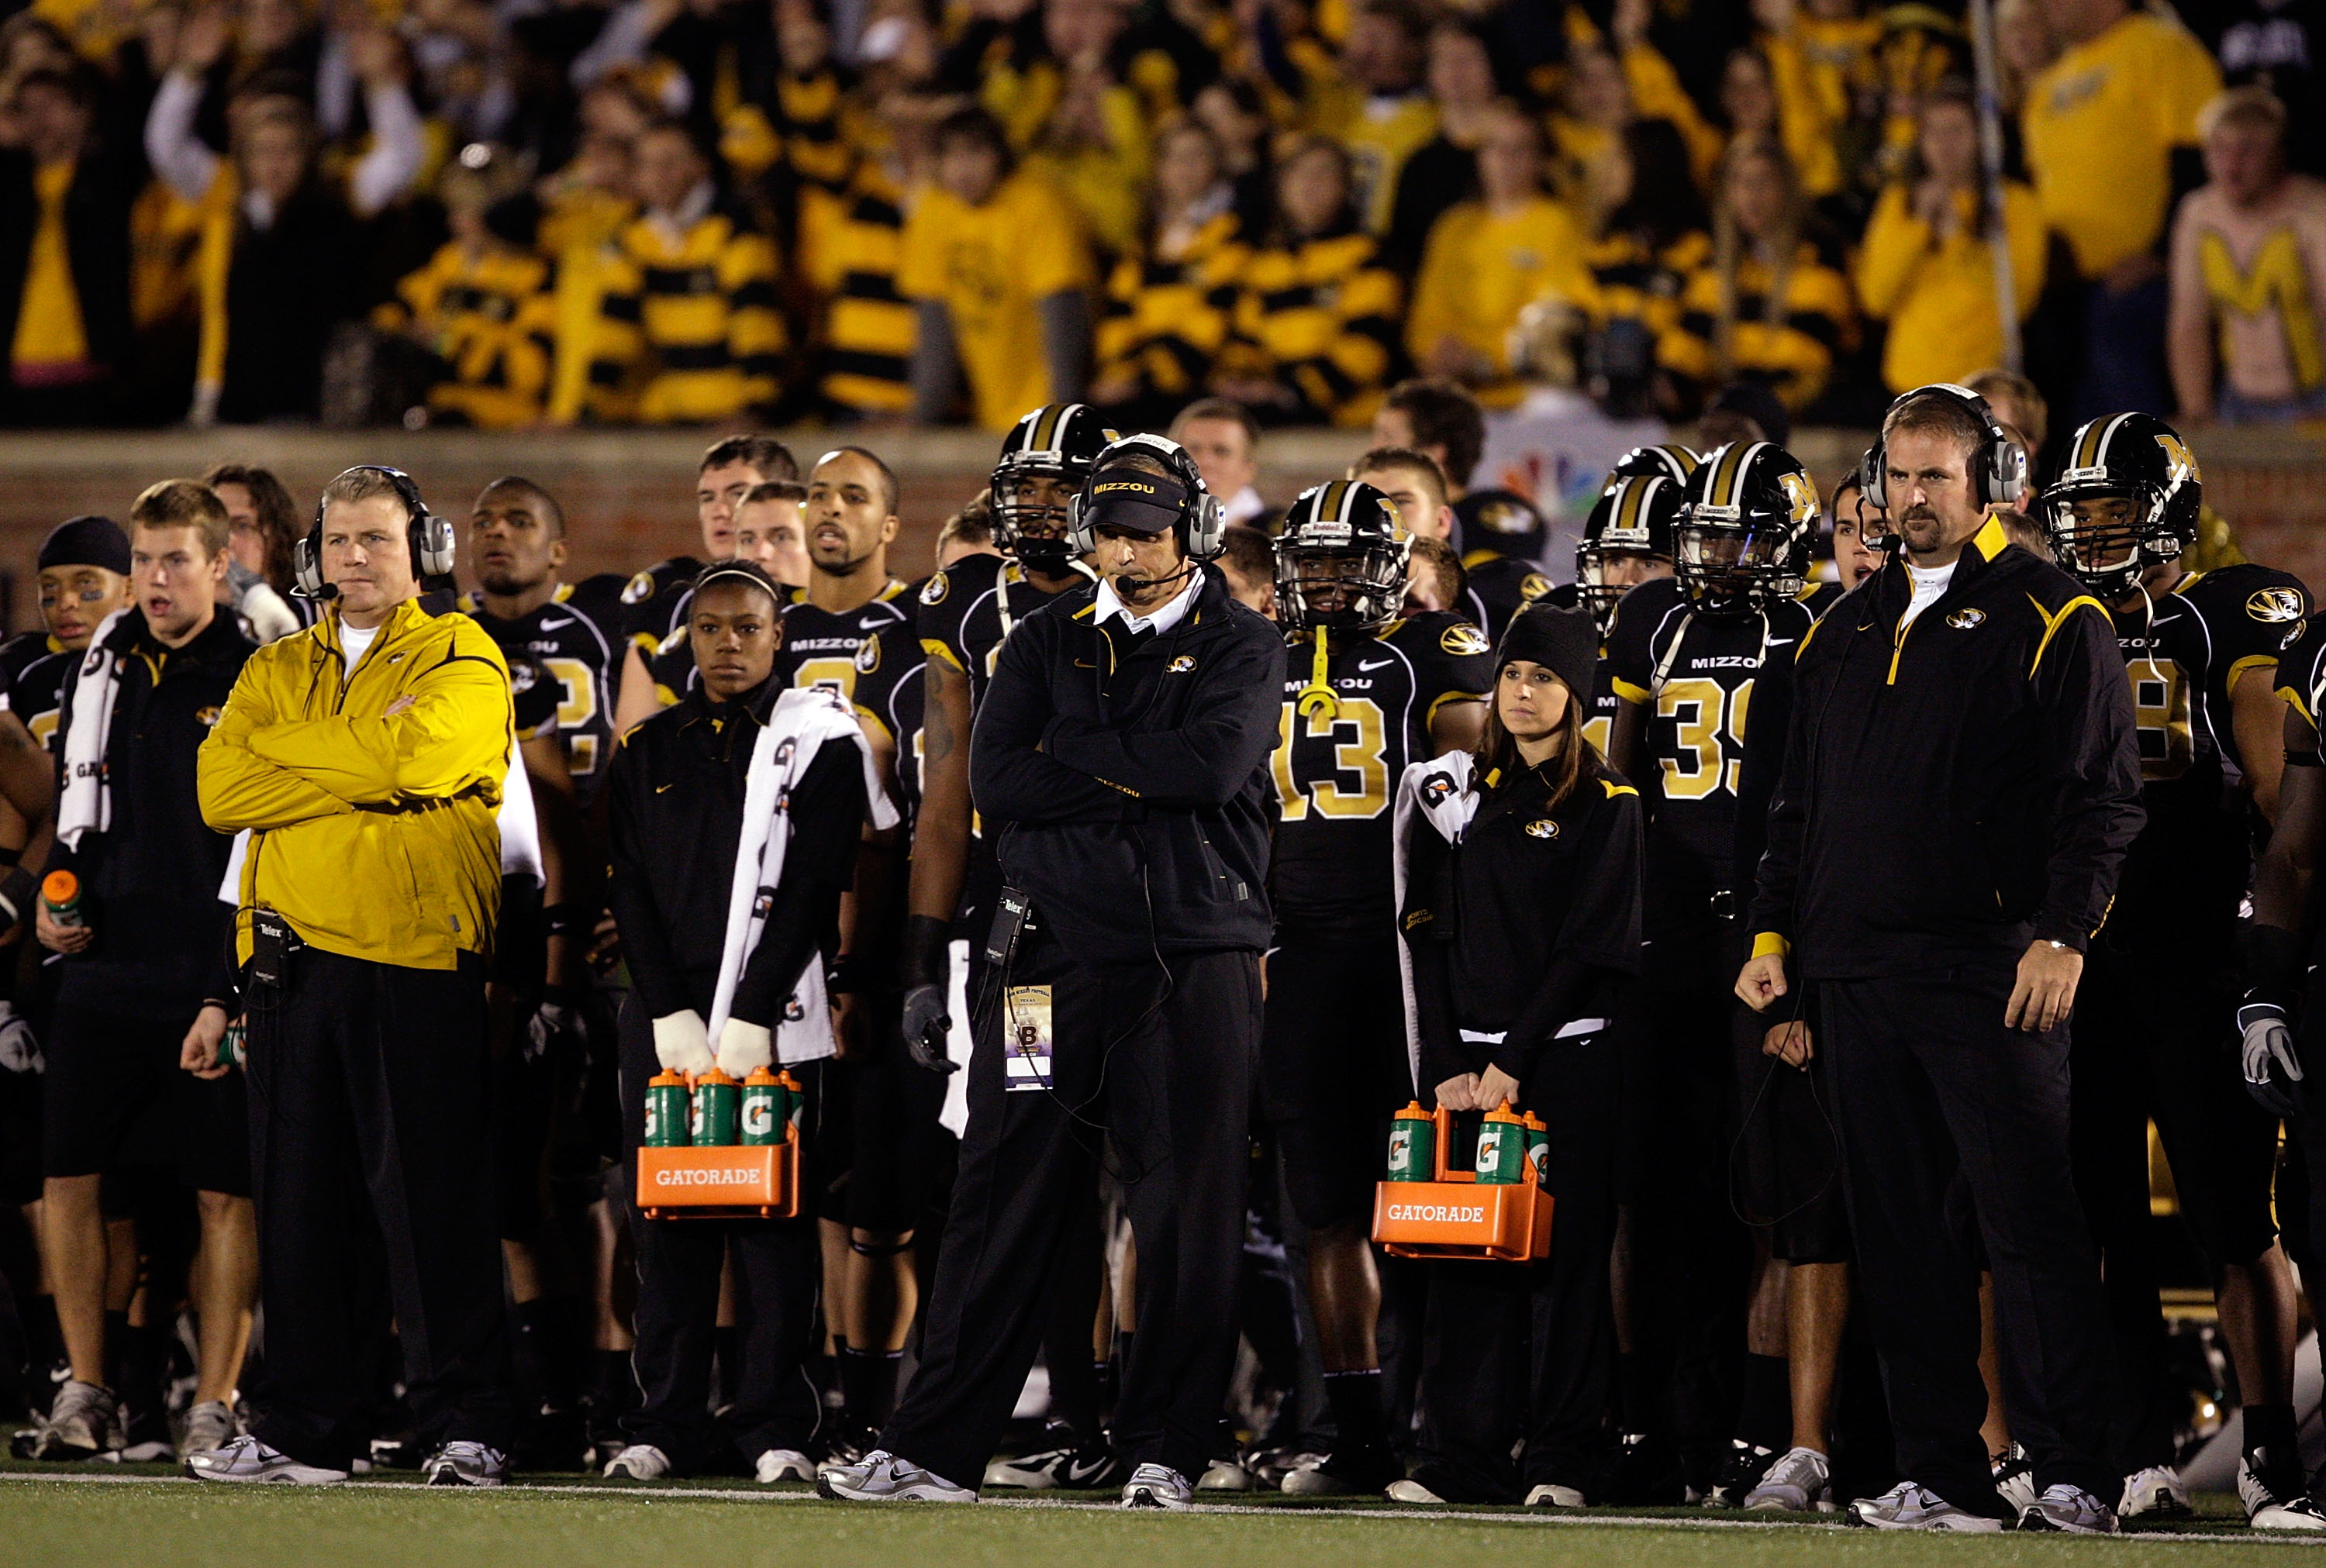 COLUMBIA, MO - OCTOBER 24:  Head coach Gary Pinkel and the Missouri Tigers watch from the sidelines during the game against the Texas Longhorns on October 24, 2009 at Faurot Field/Memorial Stadium in Columbia, Missouri.  (Photo by Jamie Squire/Getty Image